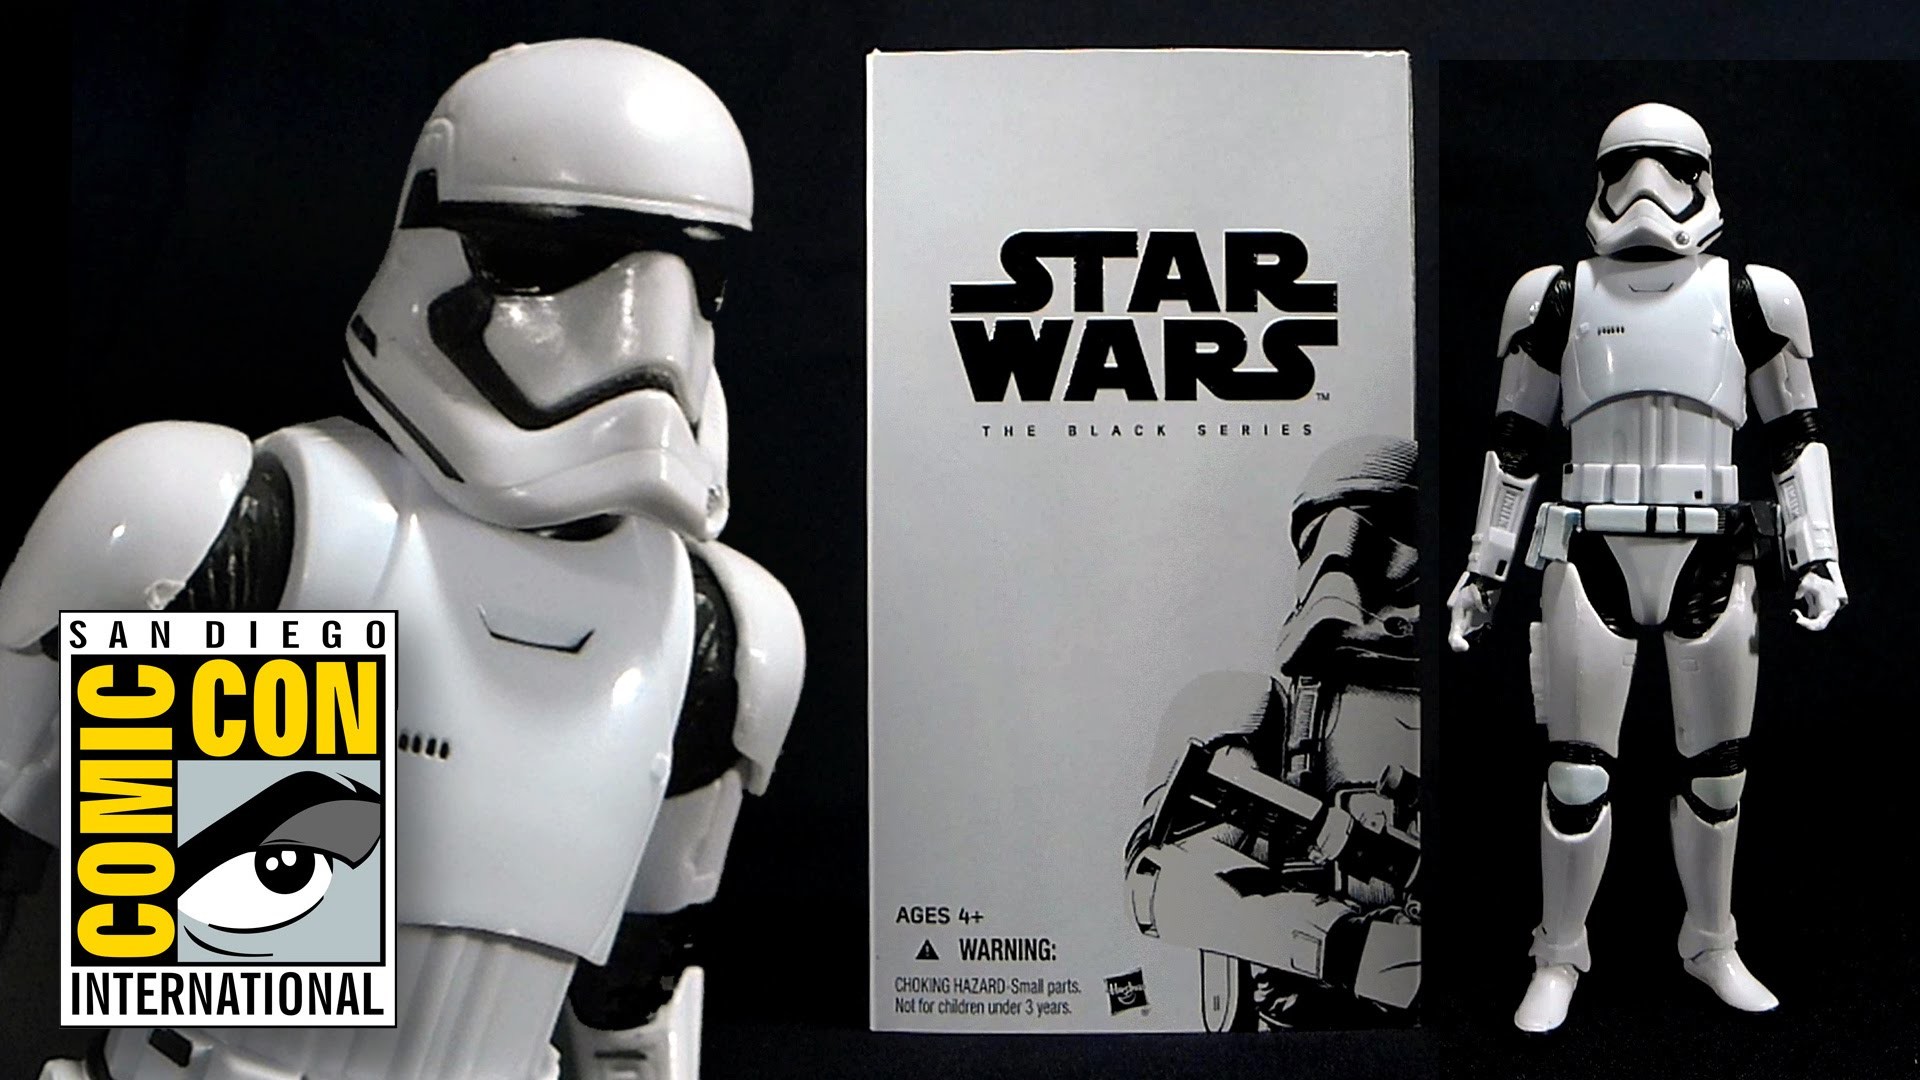 1920x1080 SDCC 2015 Star Wars: The Force Awakens First Order Stormtrooper Figure!